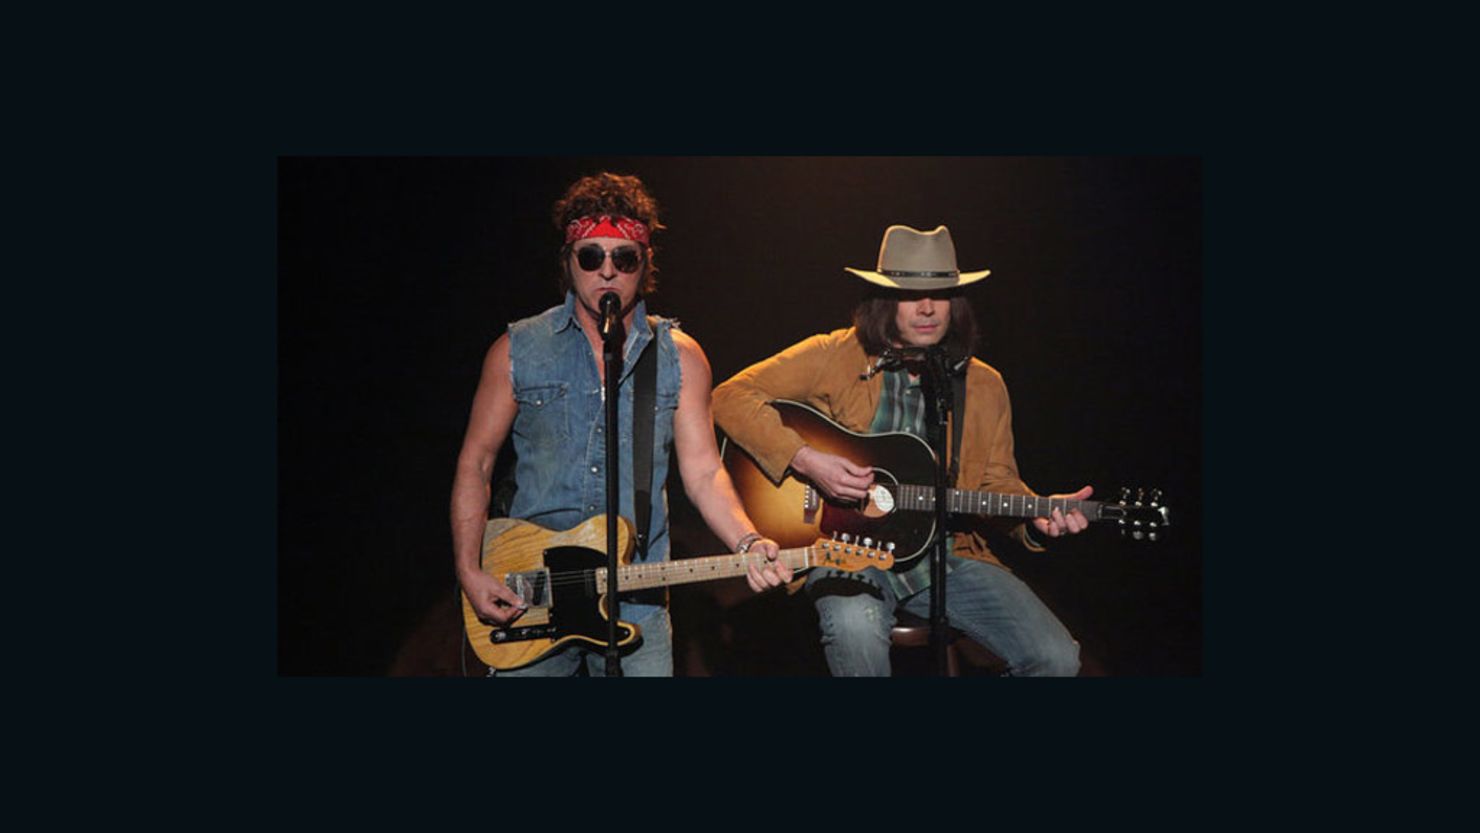 Bruce Springsteen and Jimmy Fallon, as Neil Young, perform on the March 2, 2012 episode of "Late Night with Jimmy Fallon."